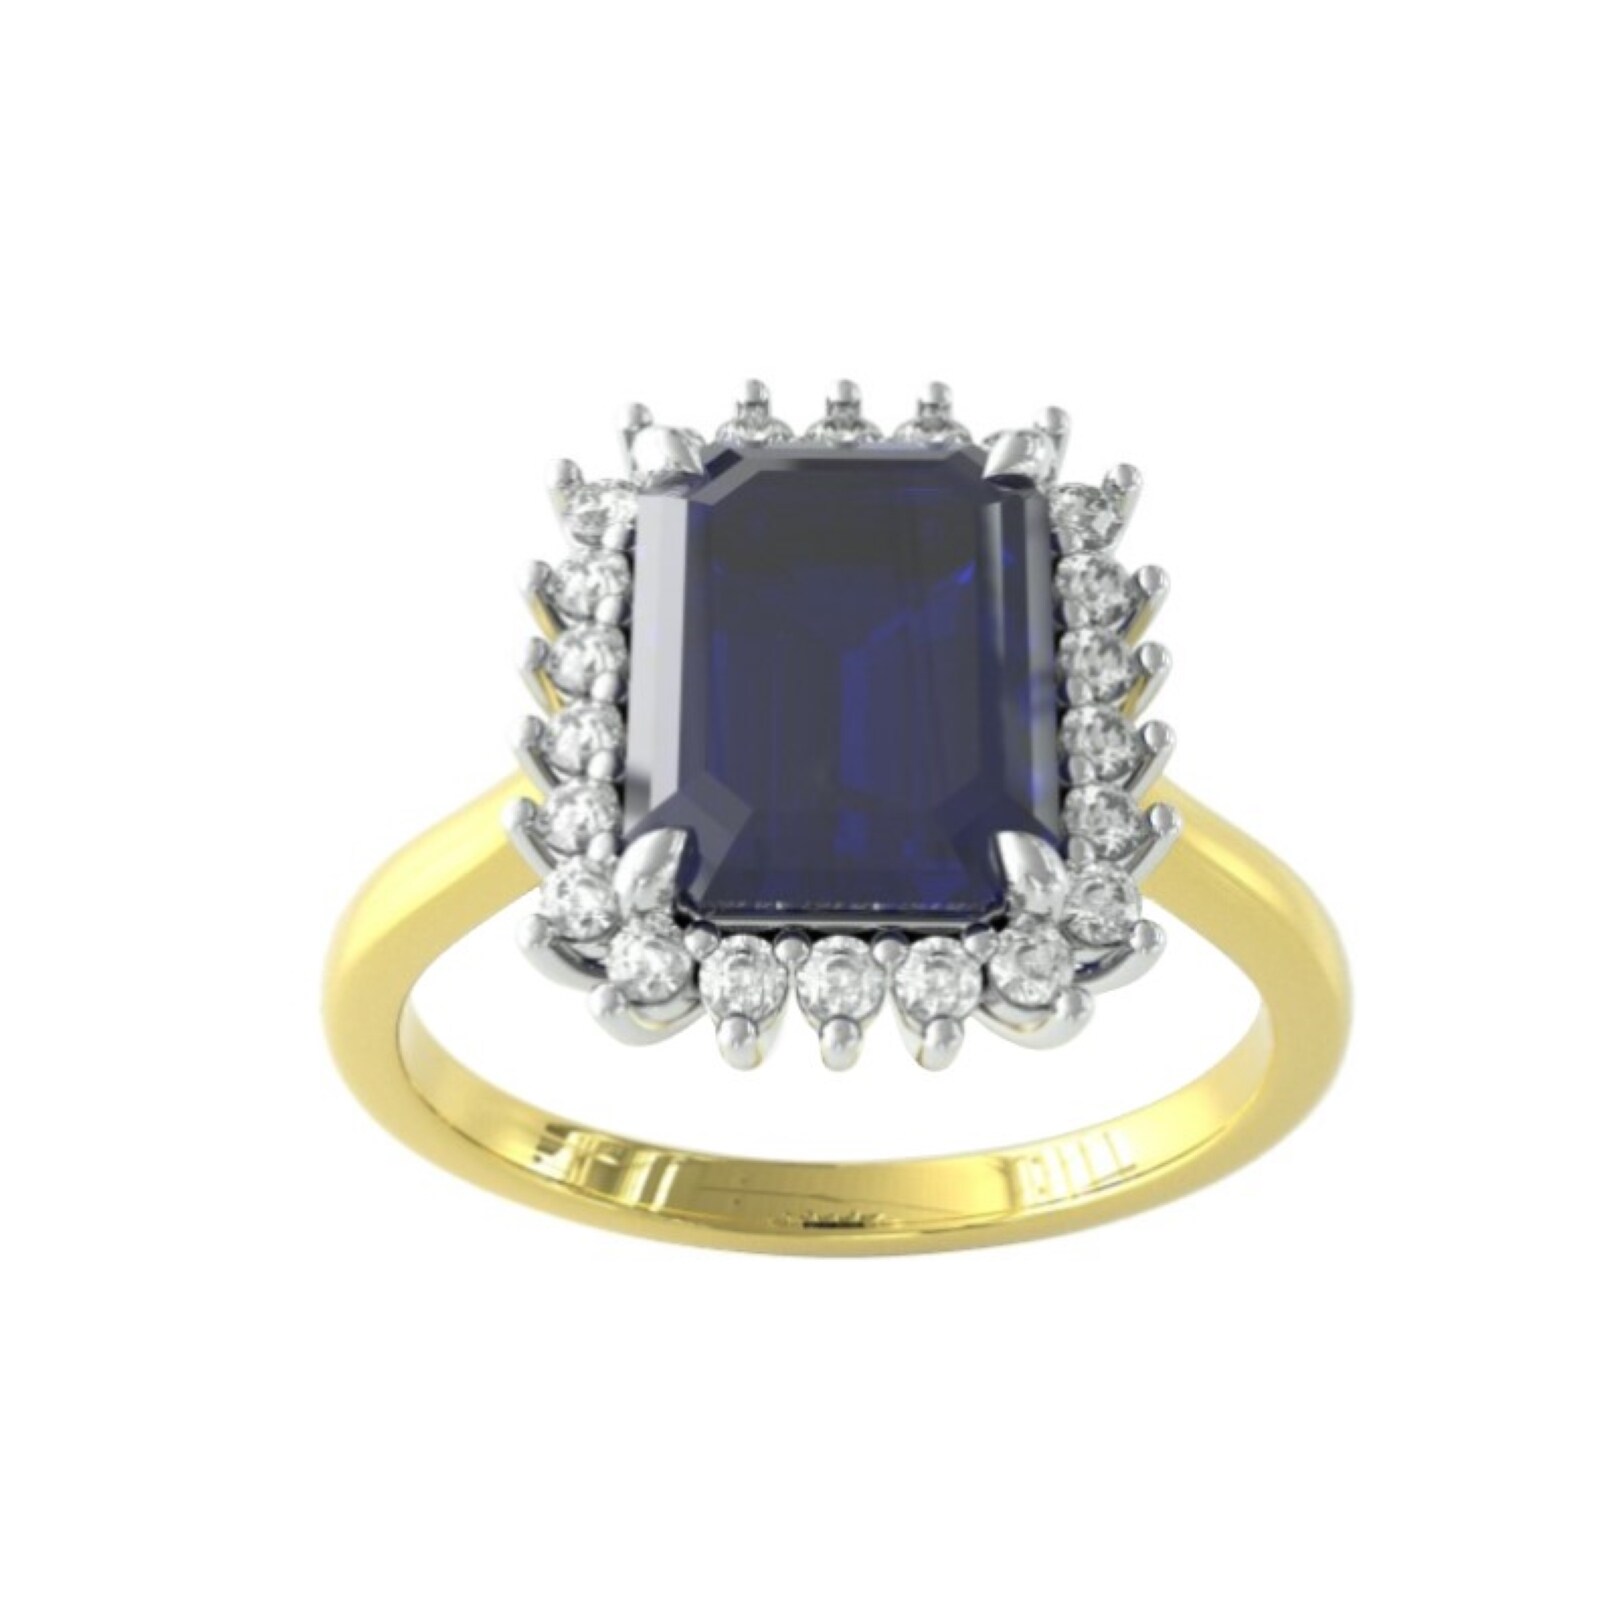 18ct White & Yellow Gold Sapphire & Diamond Cluster Ring - Ring Size Q.5